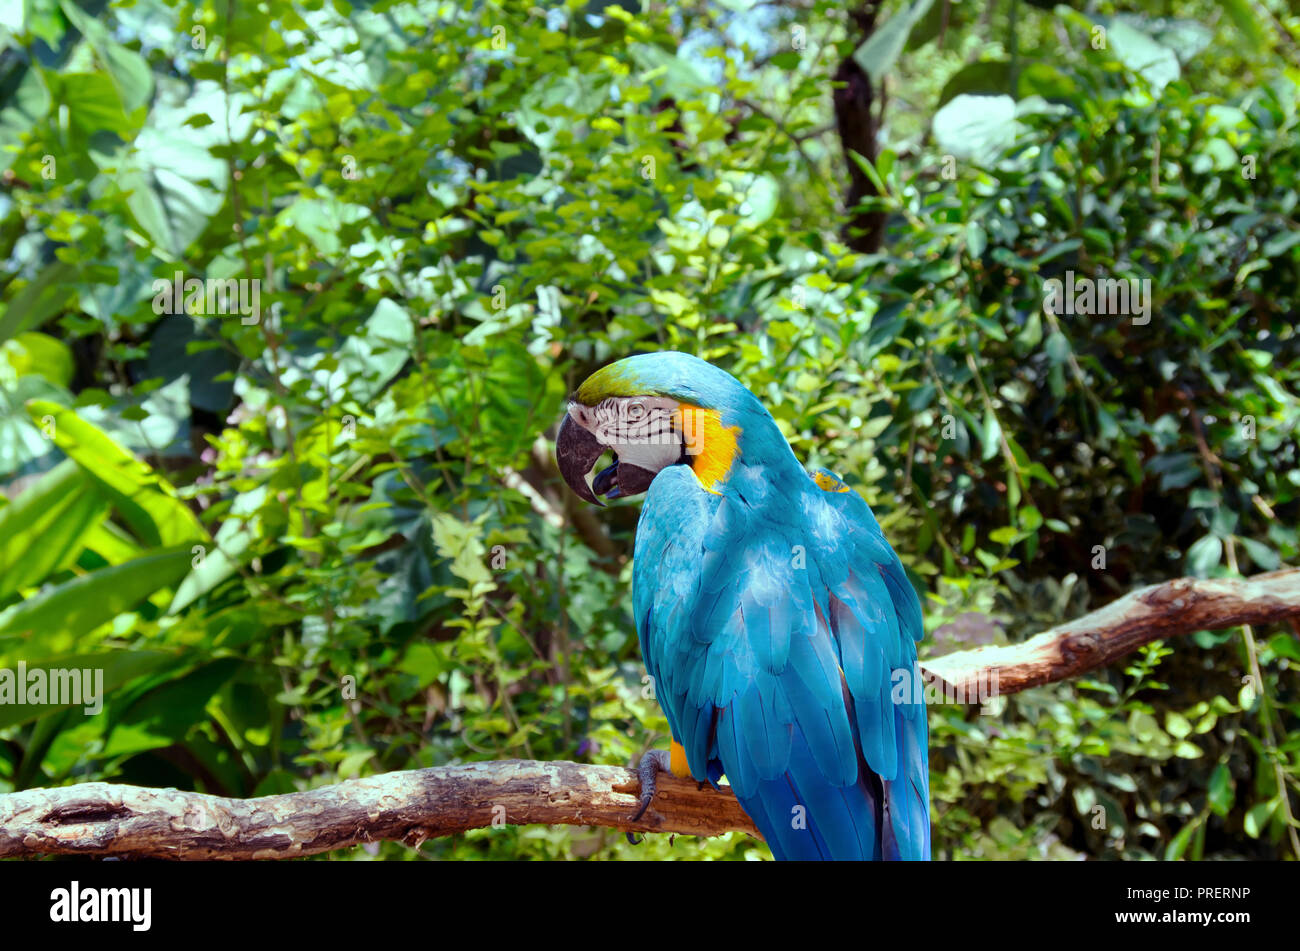 Blue and Yellow Macaw at the South Texas Botanical Gardens and Nature Center in Corpus Christi, Texas USA. Stock Photo